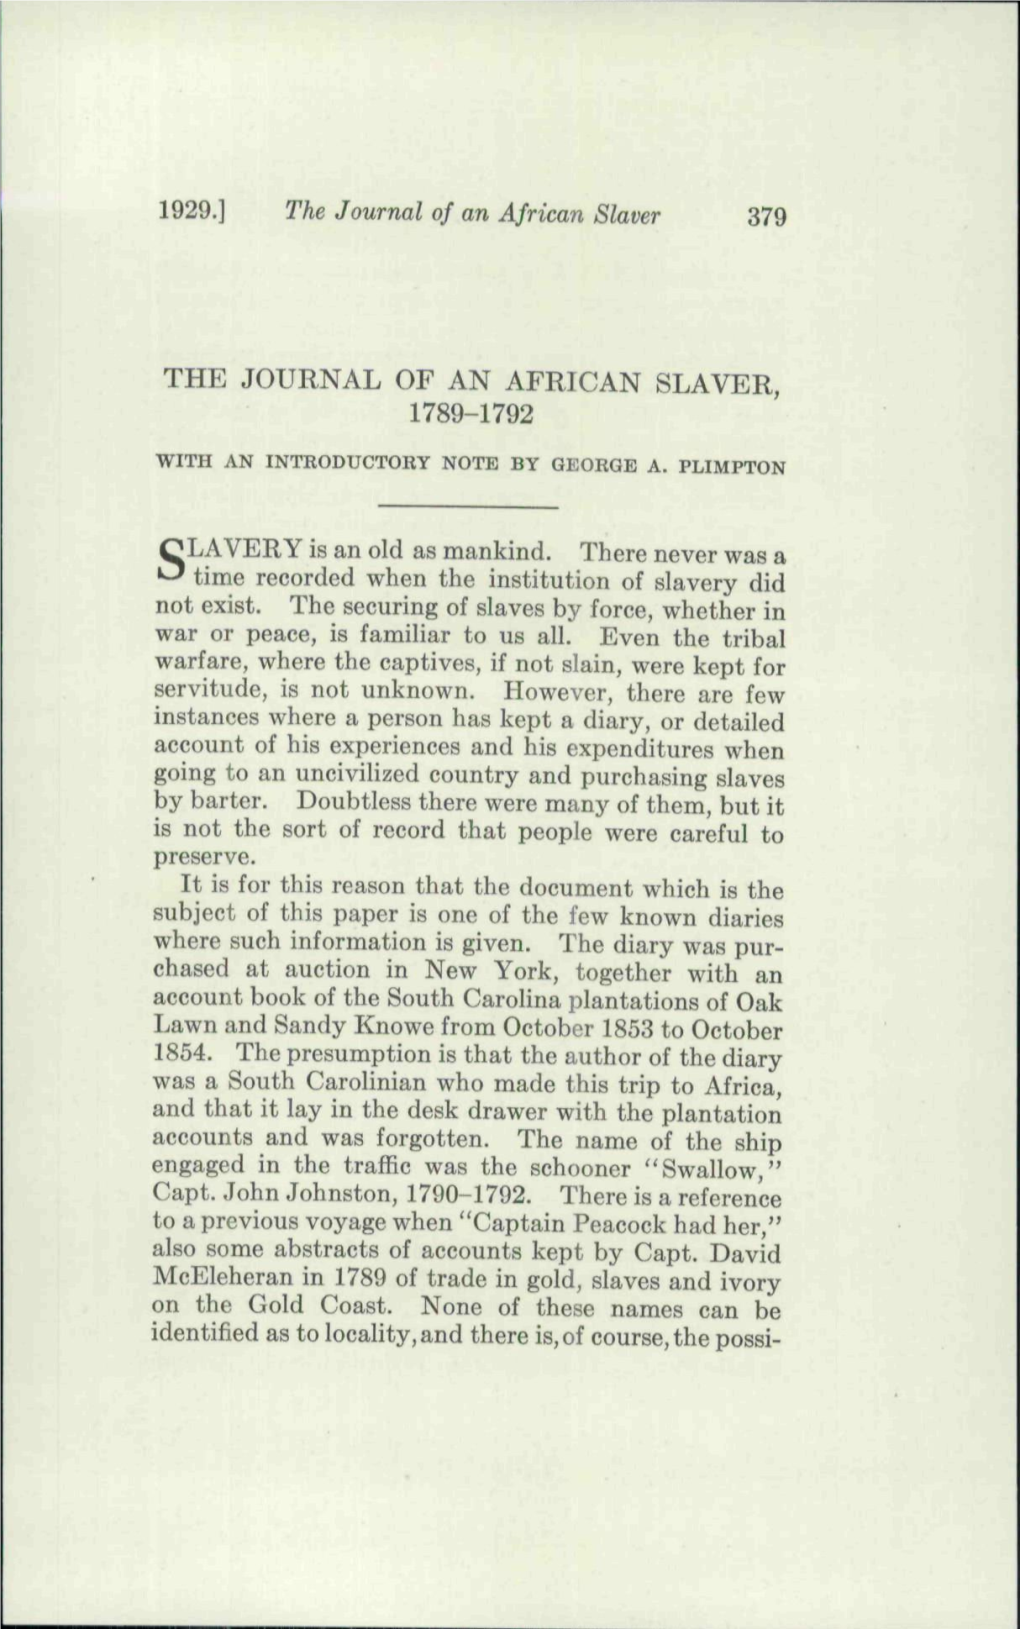 The Journal of an African Slaver, 1789-1792